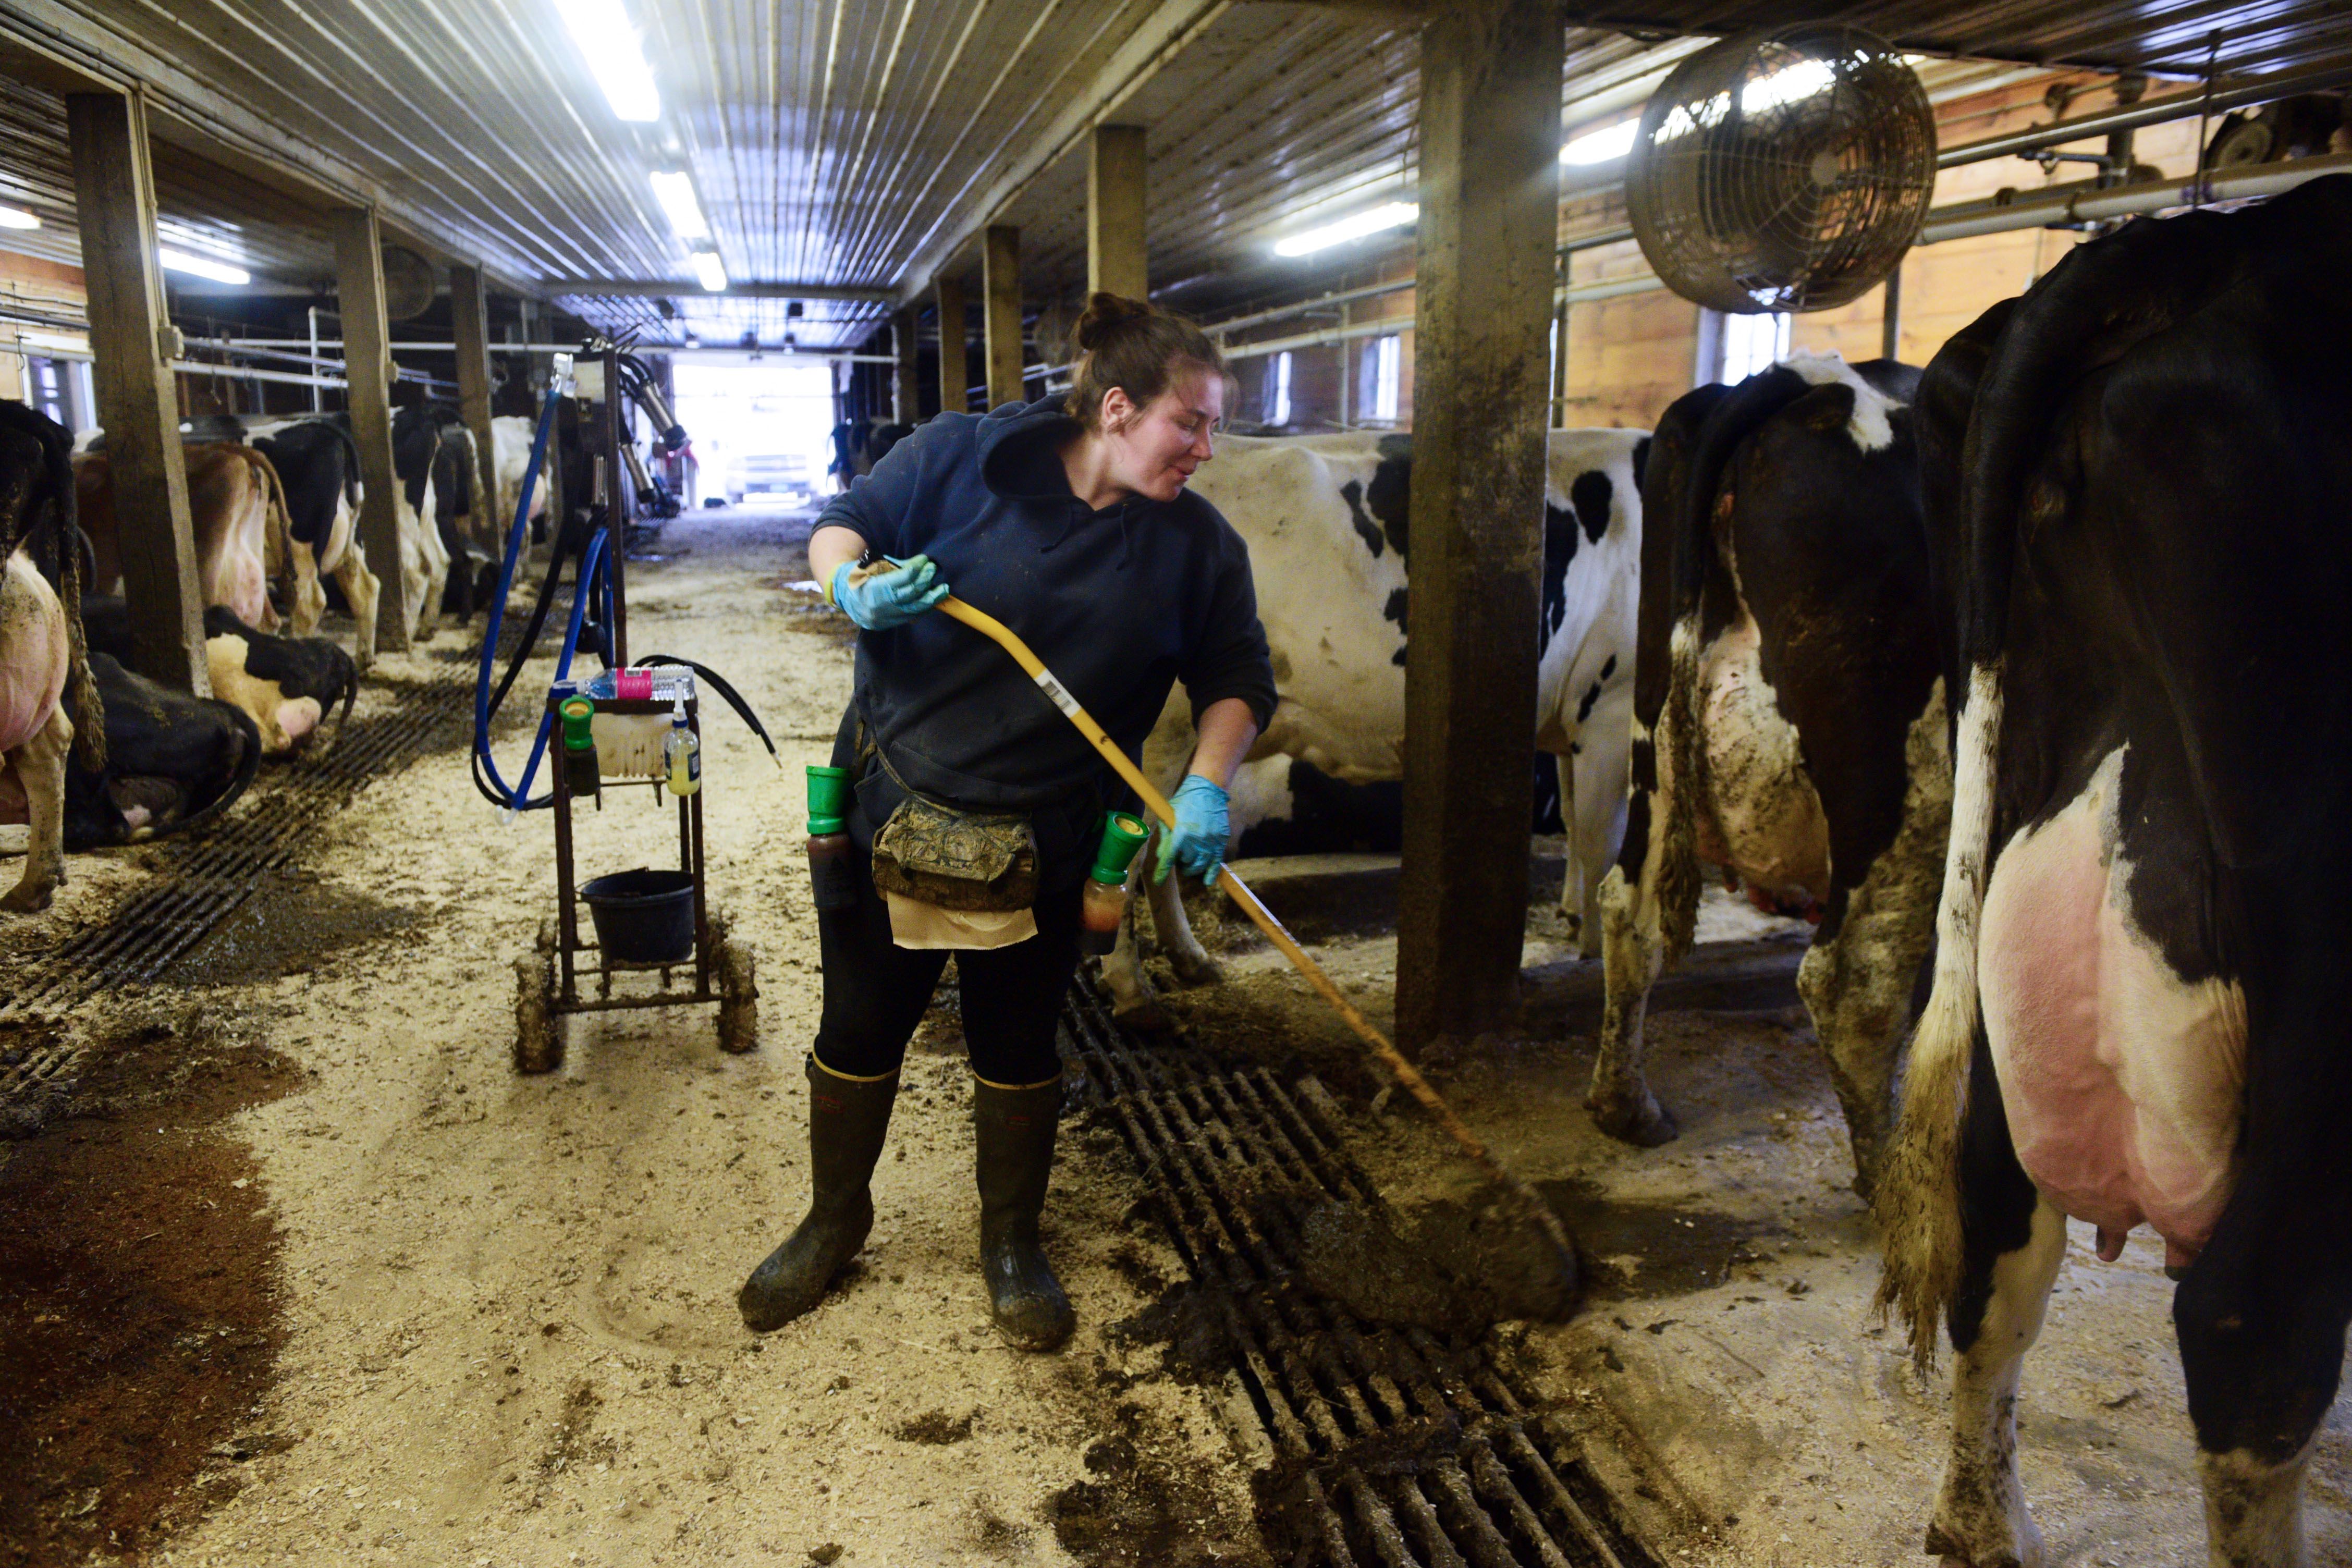 Brooke Dimmick cleans the aisle between milking her new herd of cows at Neighborly Farms in Randolph, Vt., on April 1, 2016. (Valley News- Sarah Priestap)